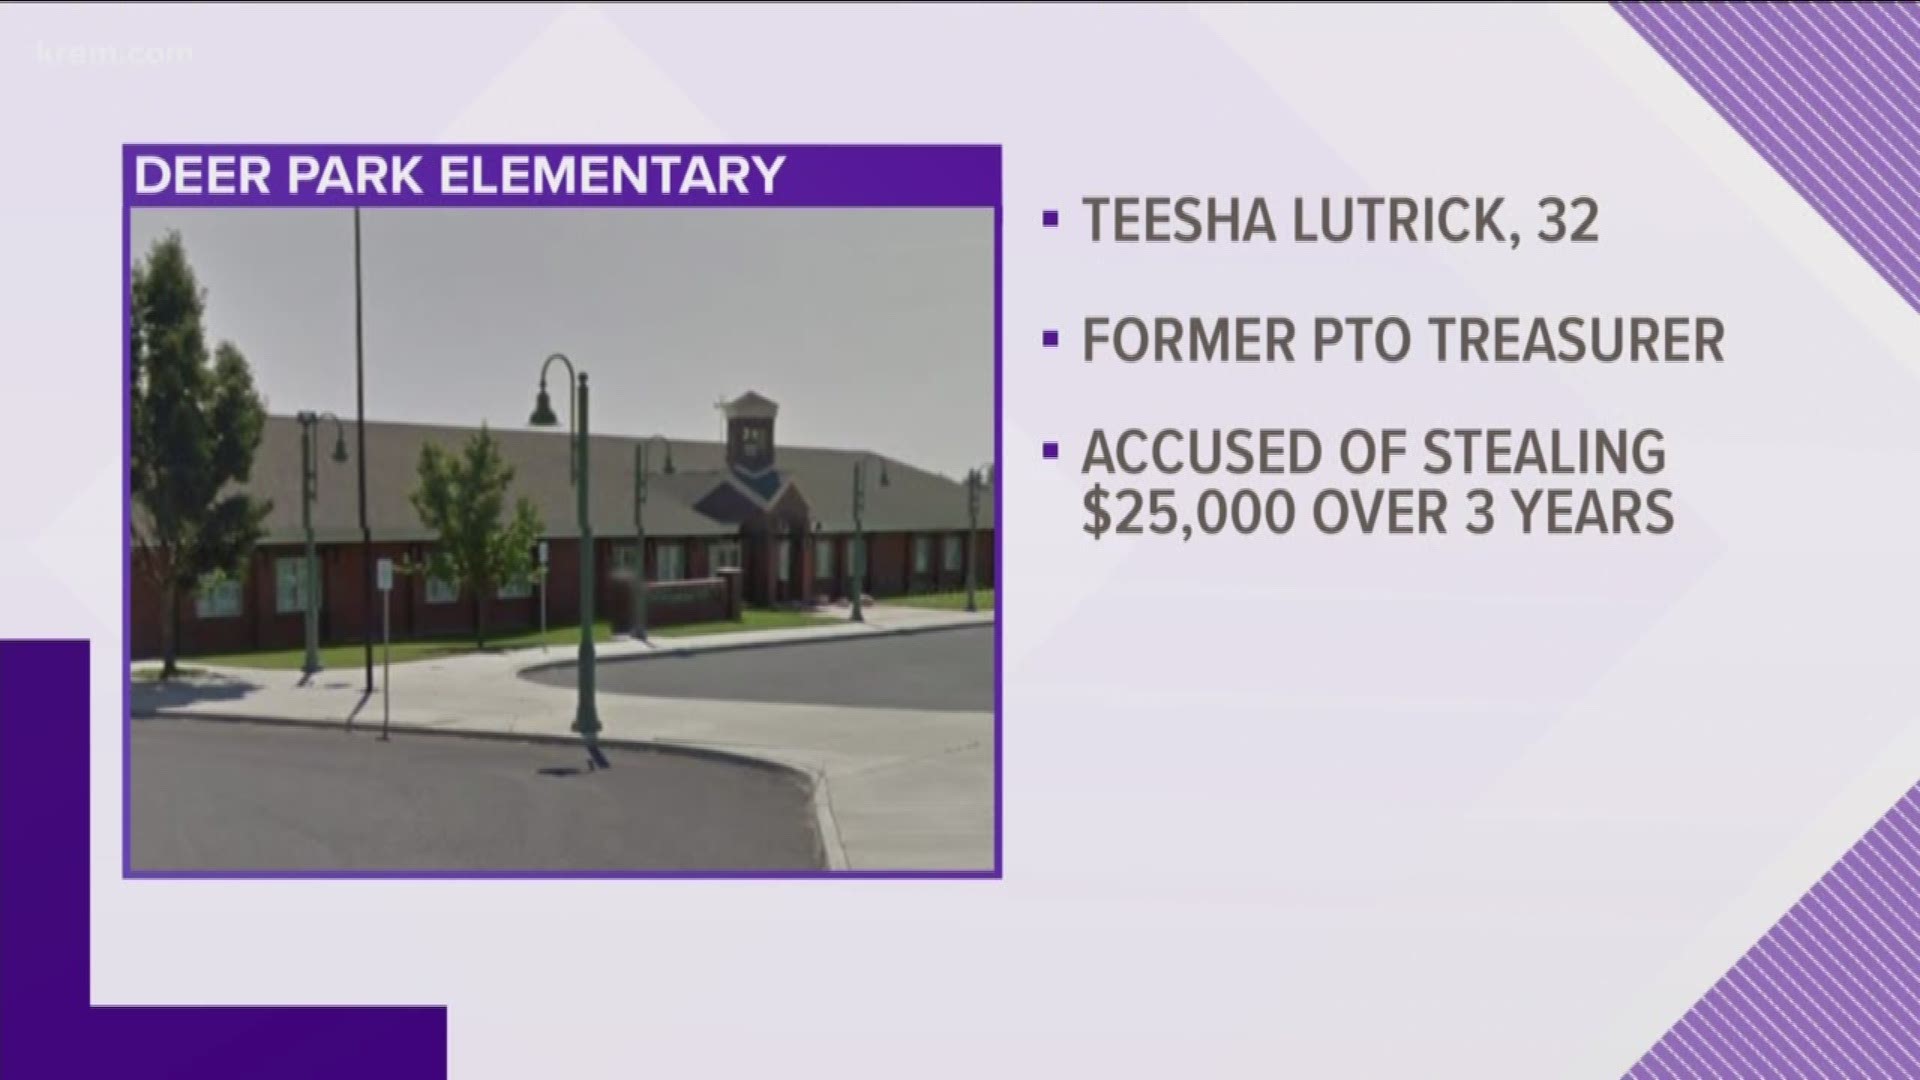 The Spokane Co. Sheriff's Office investigated Teesha Lutrick for stealing over $25,000 from the PTO. She faces two first-degree theft charges and 19 forgery charges.